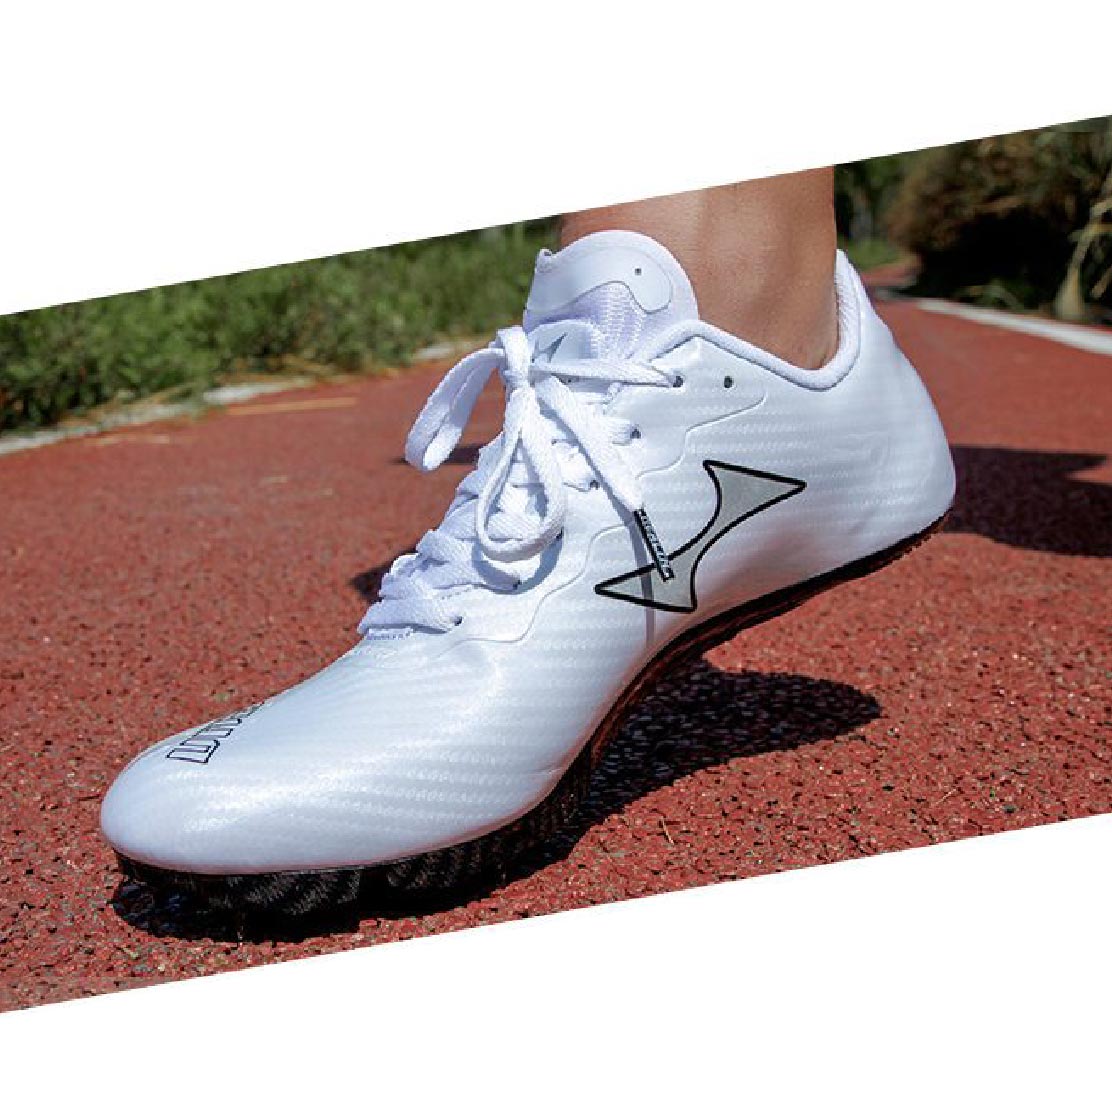 Running 101: How to Pick and Put Spikes on Track Shoes (Track Spikes)